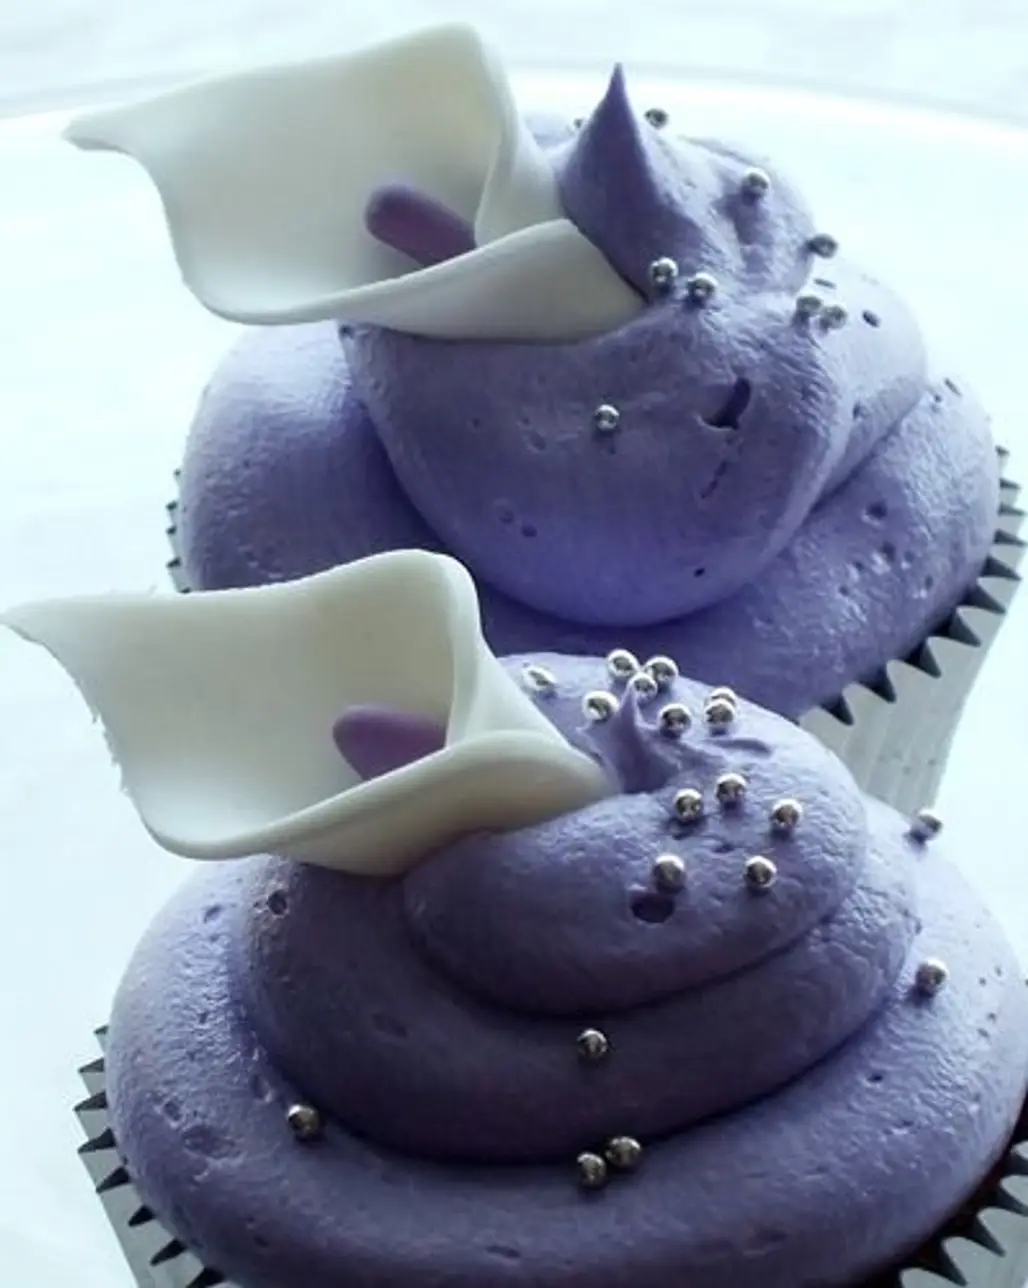 Cala Lilly Cupcakes